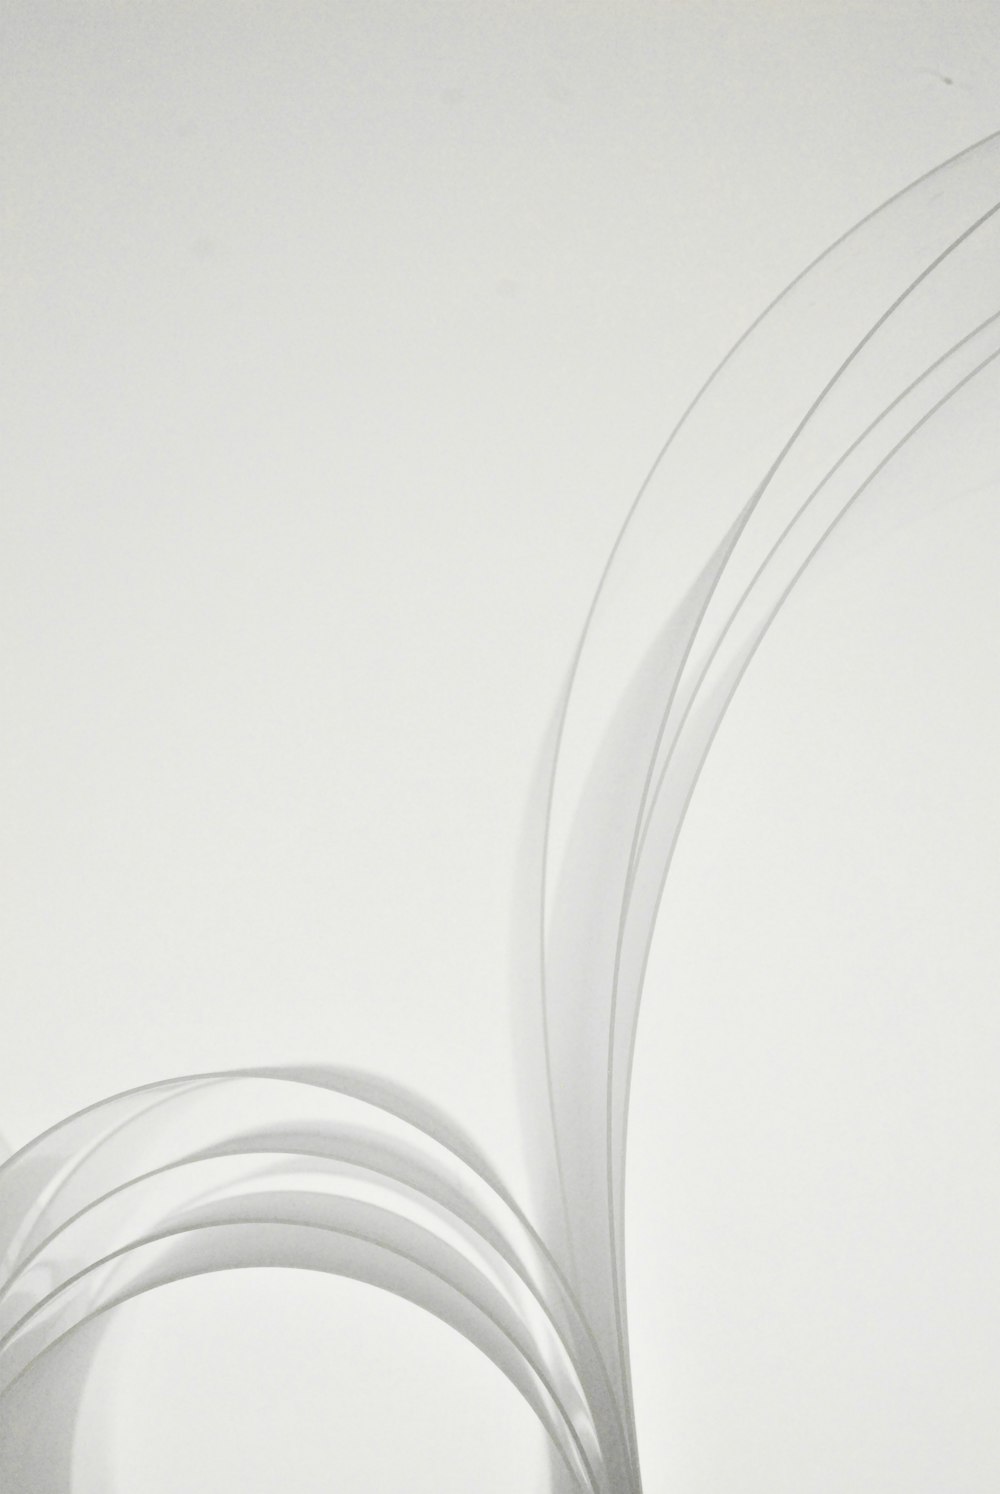 white and gray spiral light